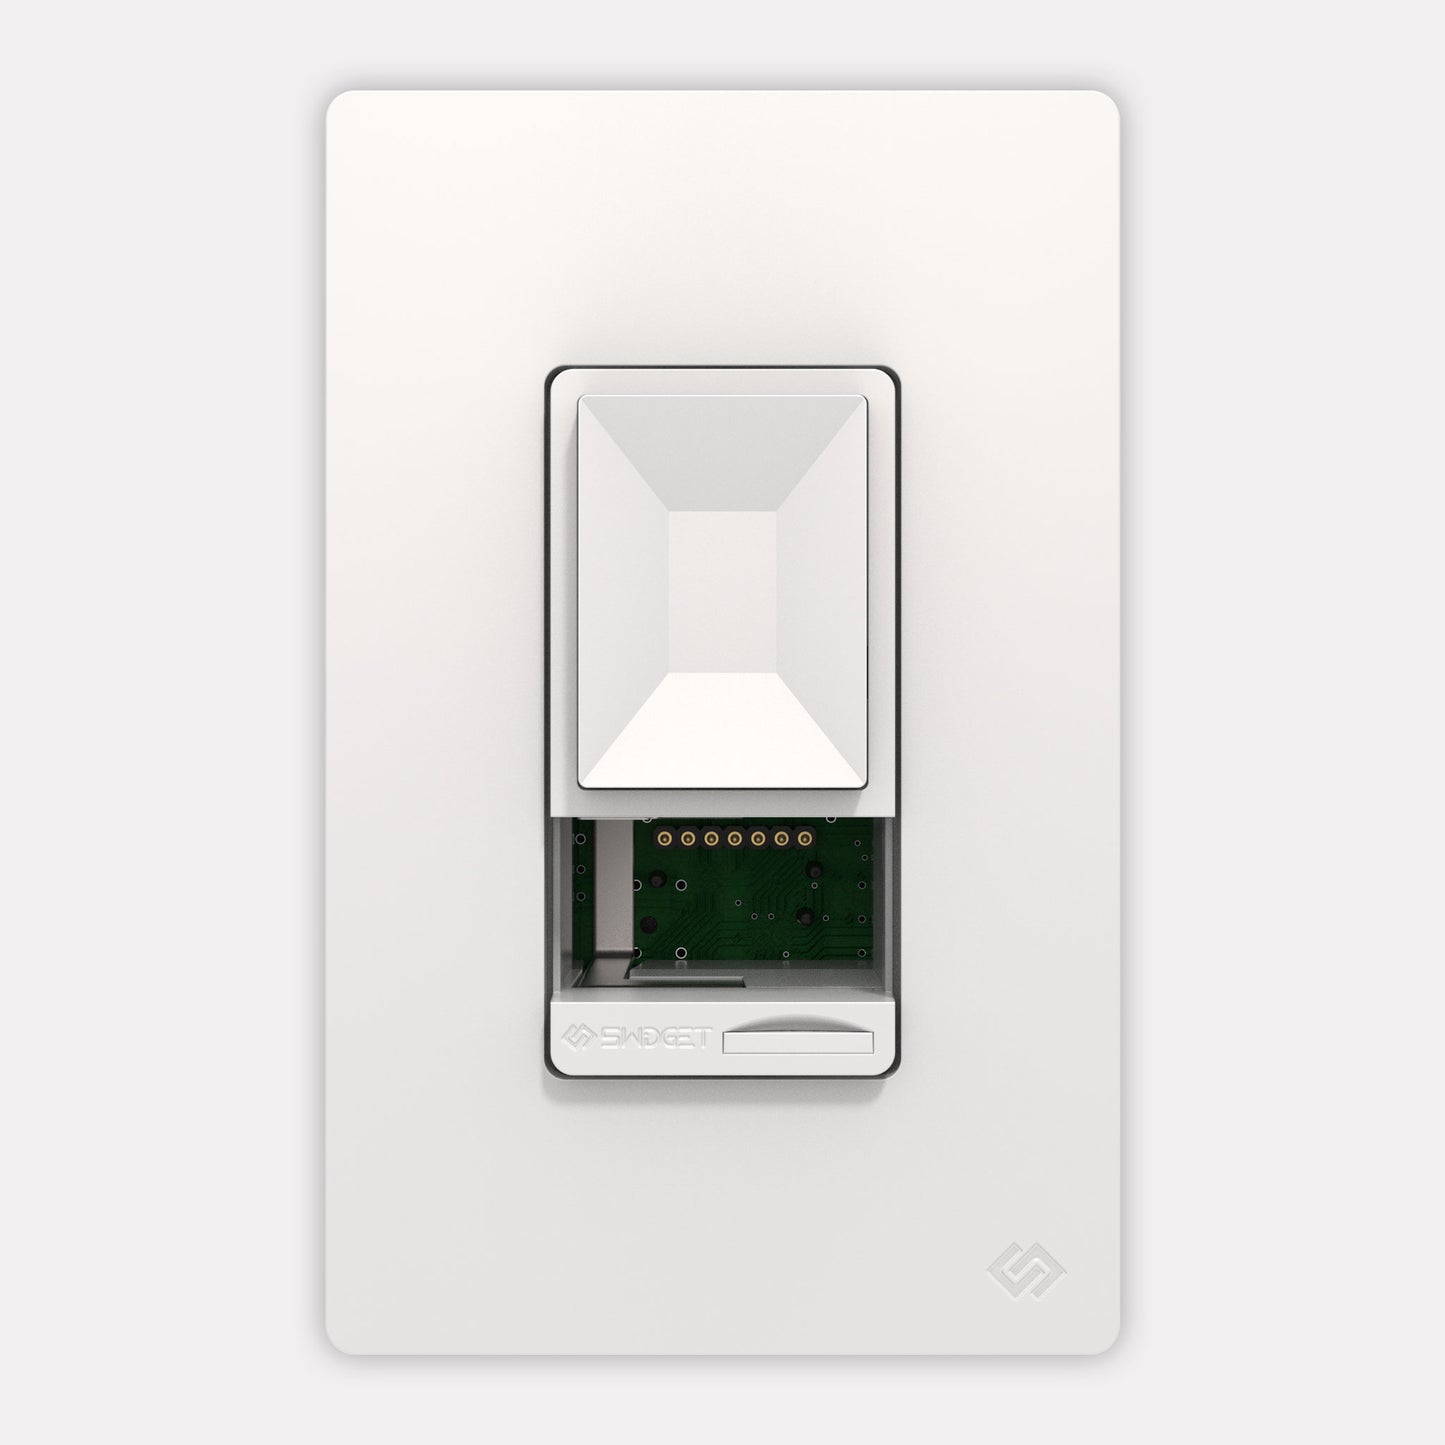 Build your own Dimmer Switch